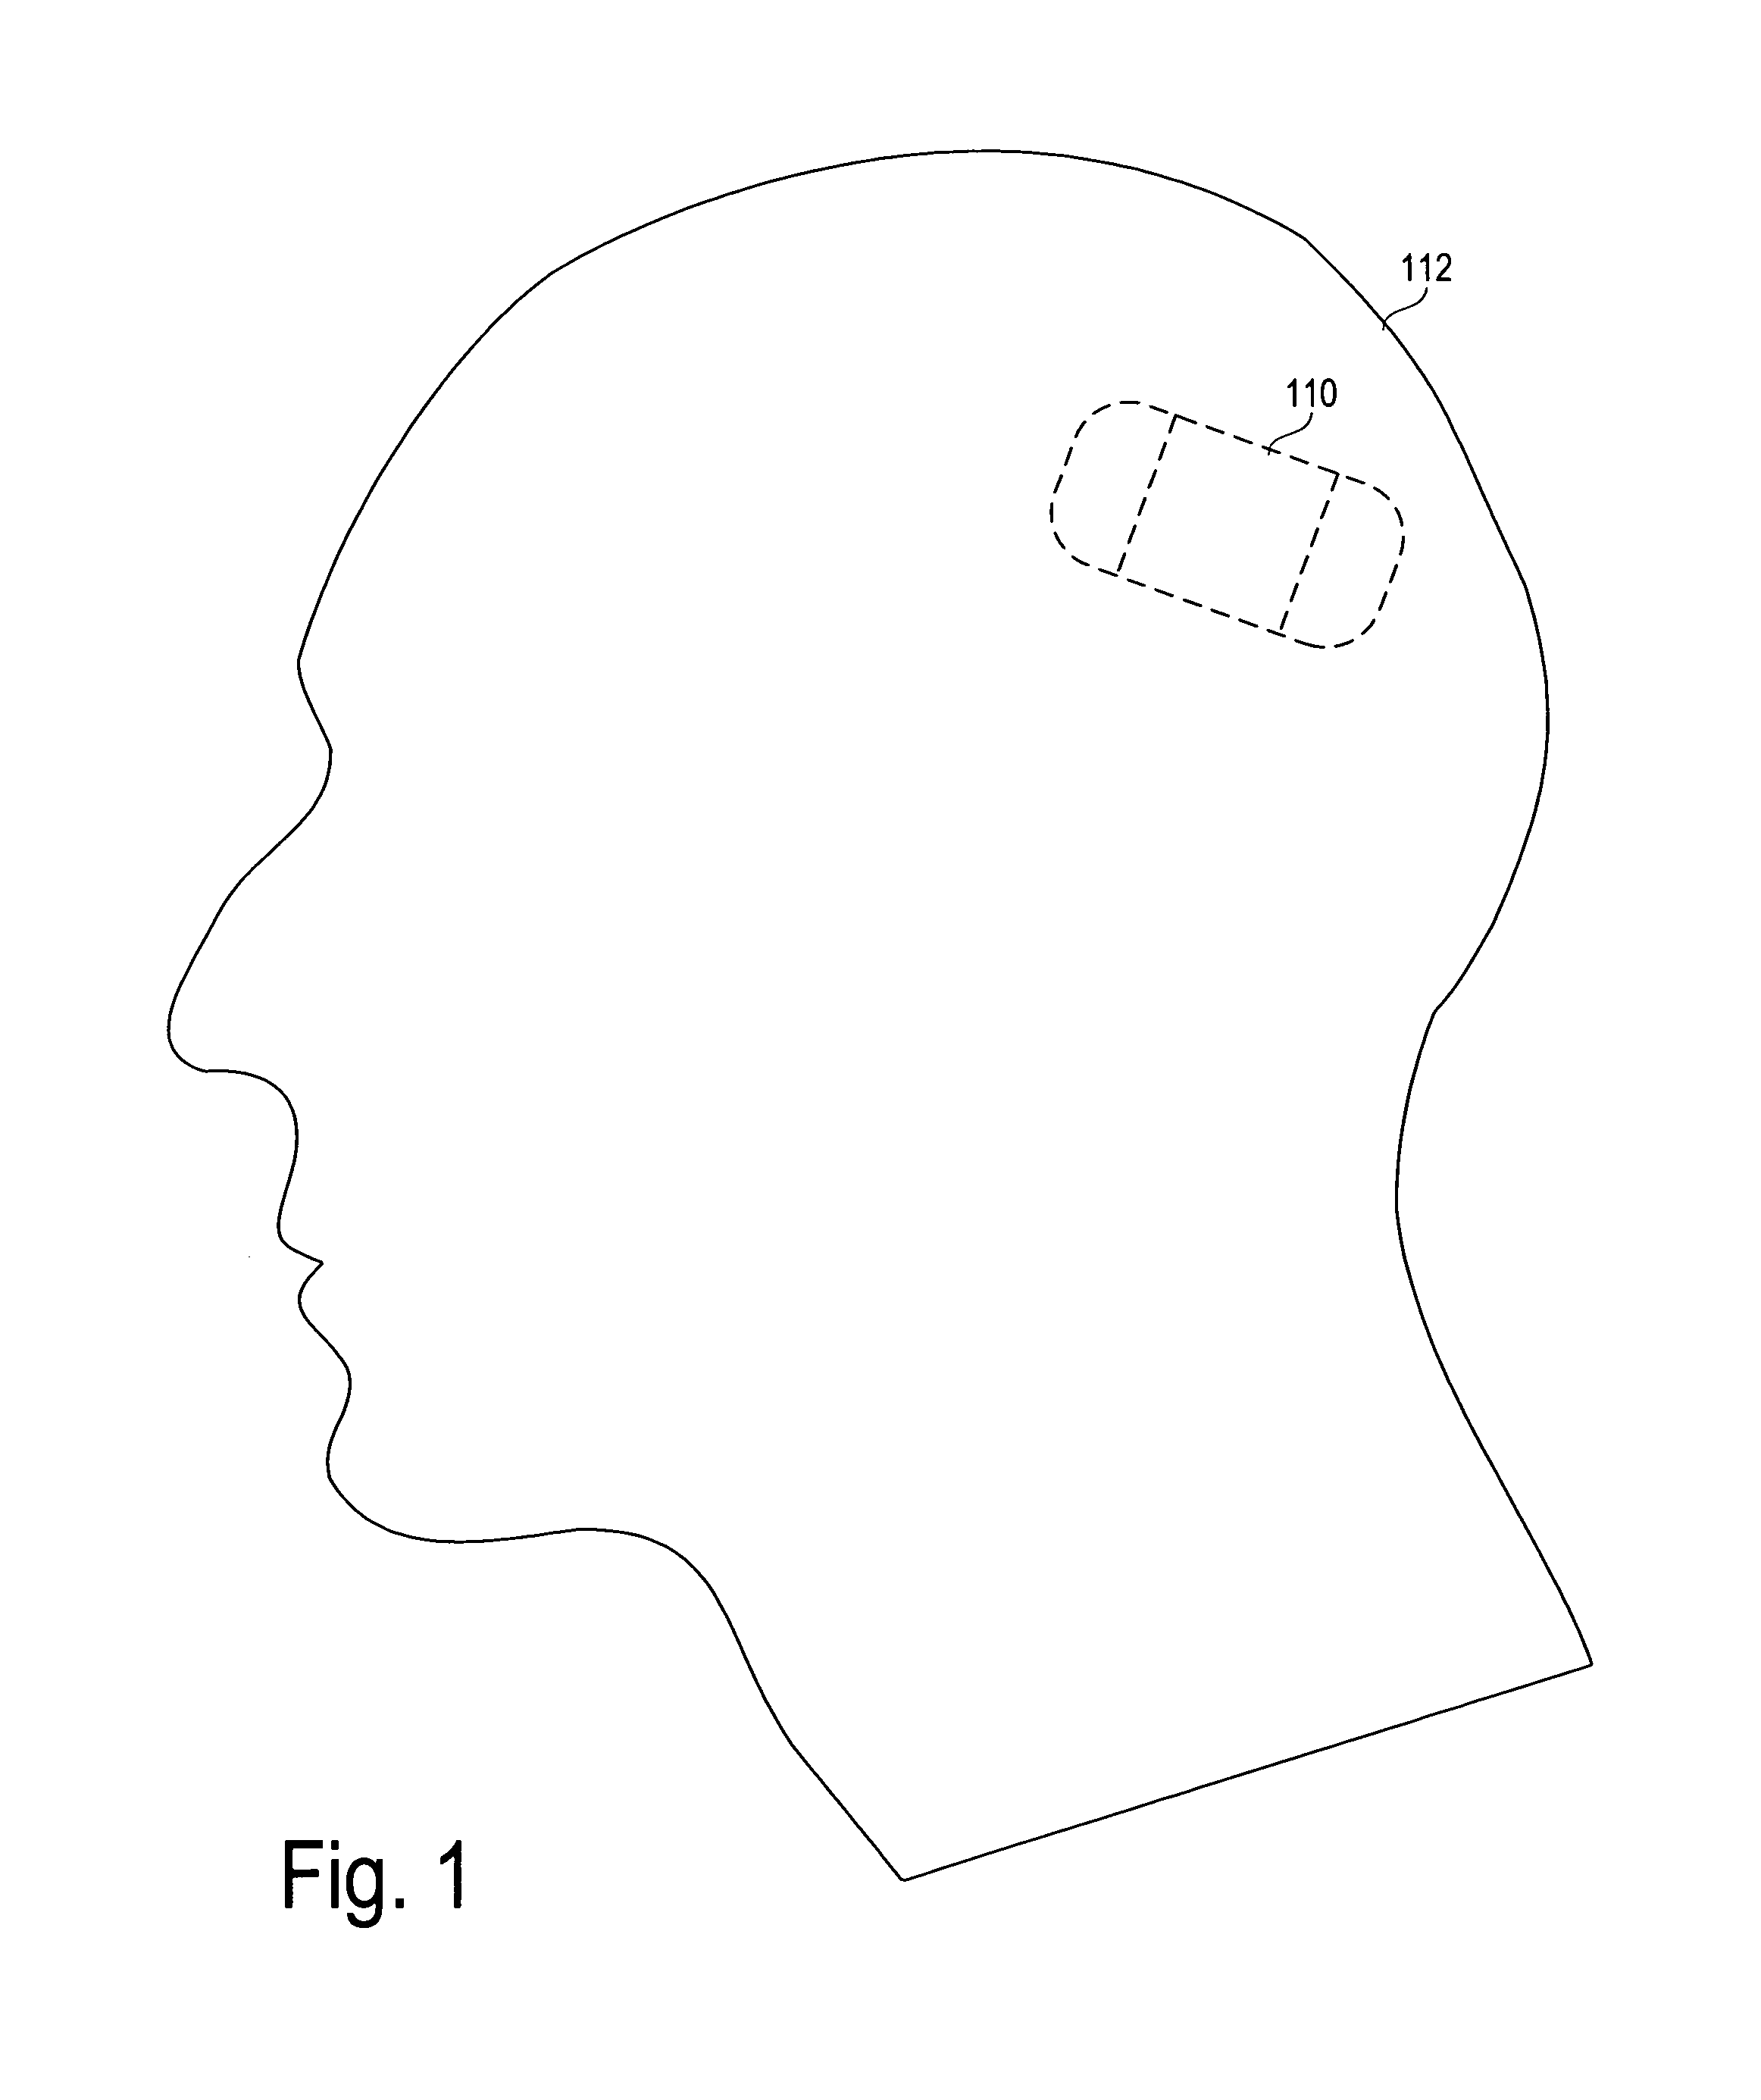 Seizure sensing and detection using an implantable device